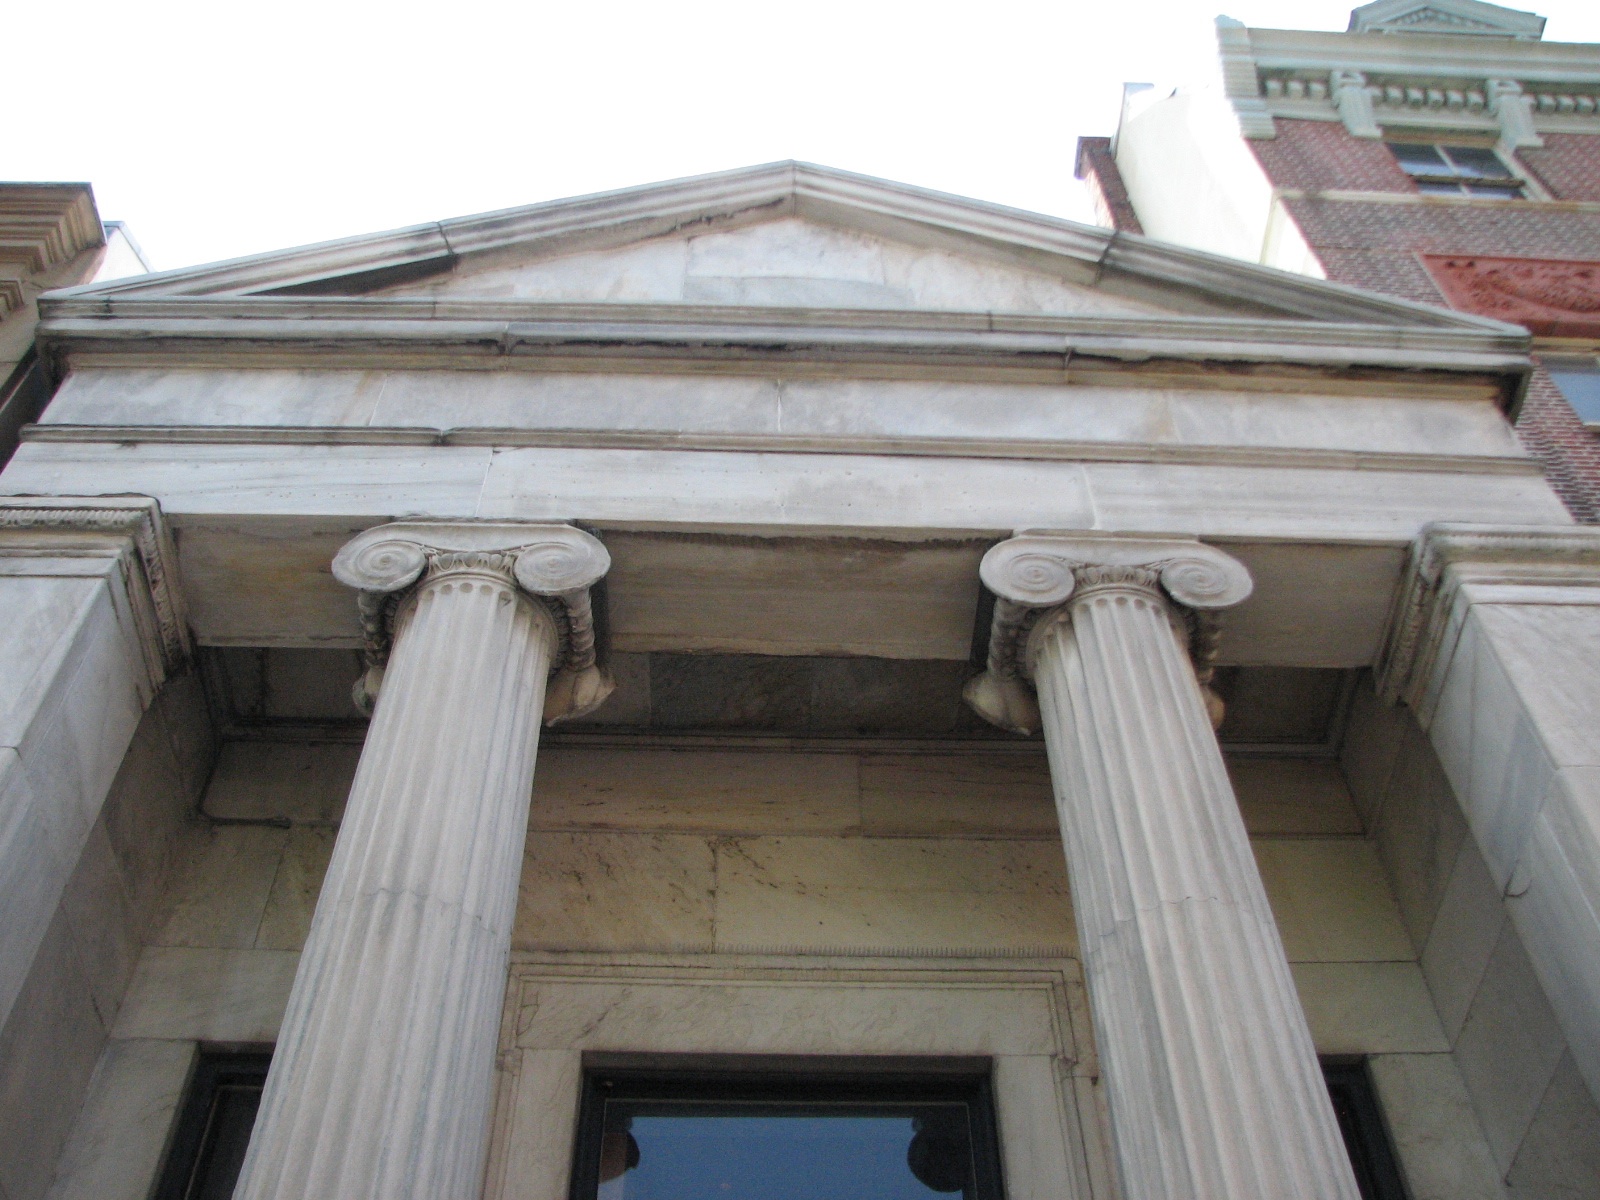 The Ionic columns lend the little building a powerful presence.